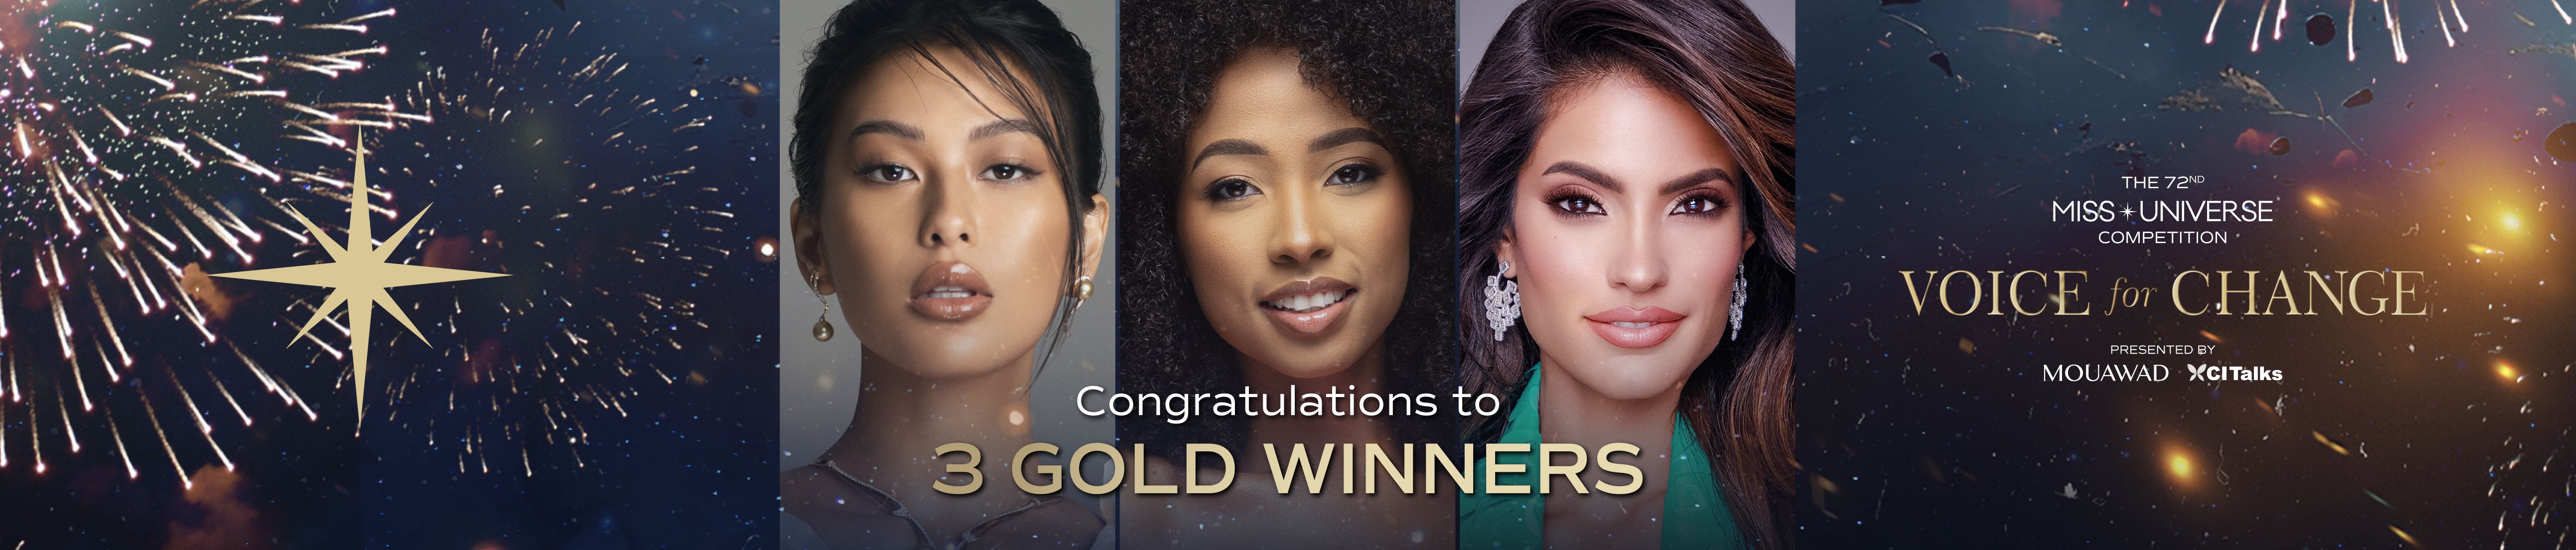 Global Change Advocates: Meet the Gold Winners of the 72nd Miss Universe Voice for Change Contest on CI Talks